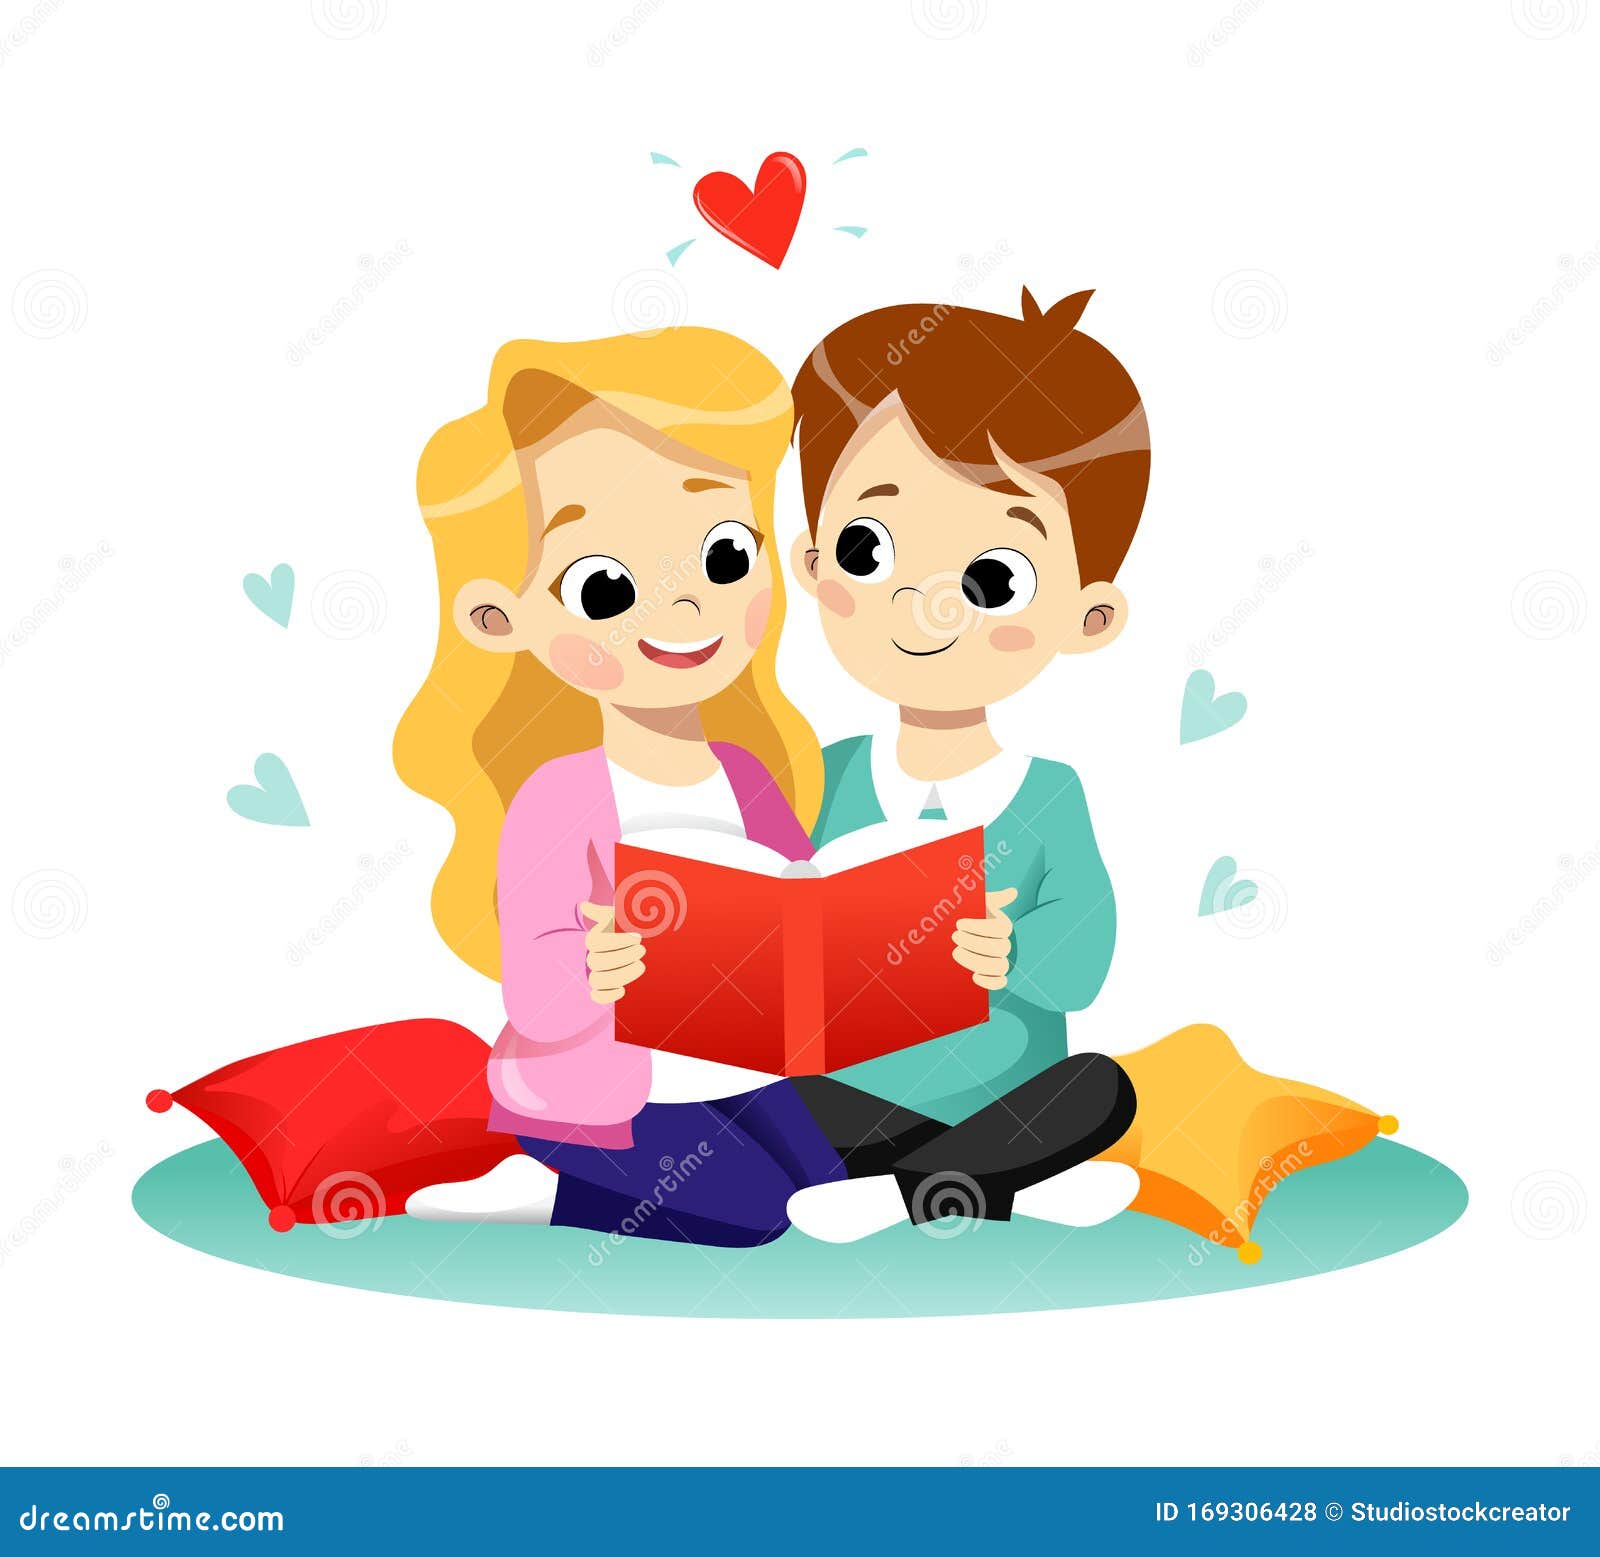 Children Education Concept. Happy Cute Cartoon Boy and Girl are